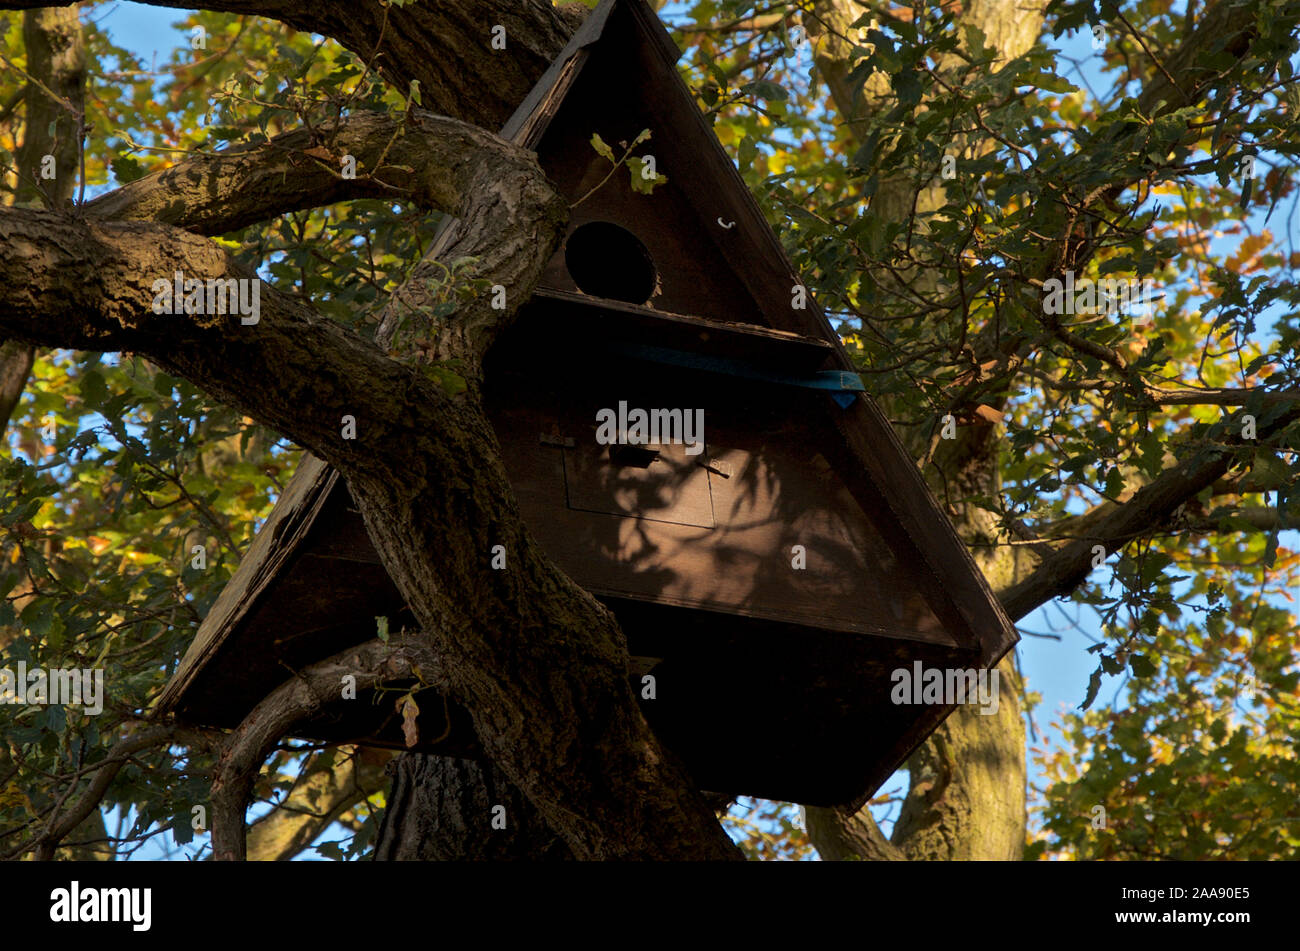 A triangular shaped Owl box in a tree purpose built to encourage owl nesting. Stock Photo